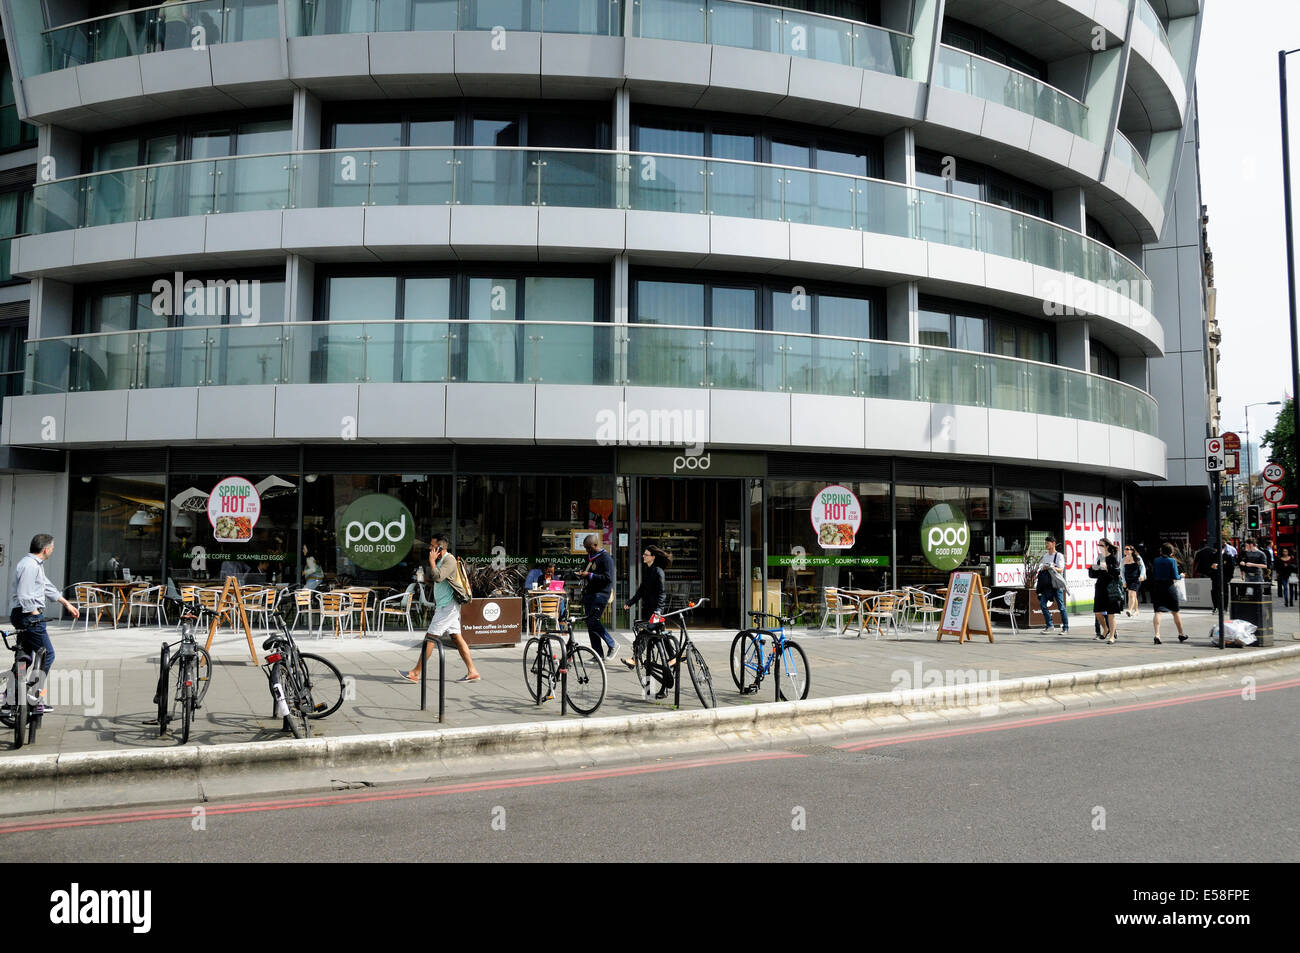 Pod Good Food with people passing and bike racks outside, Old Street, London England Britain UK Stock Photo